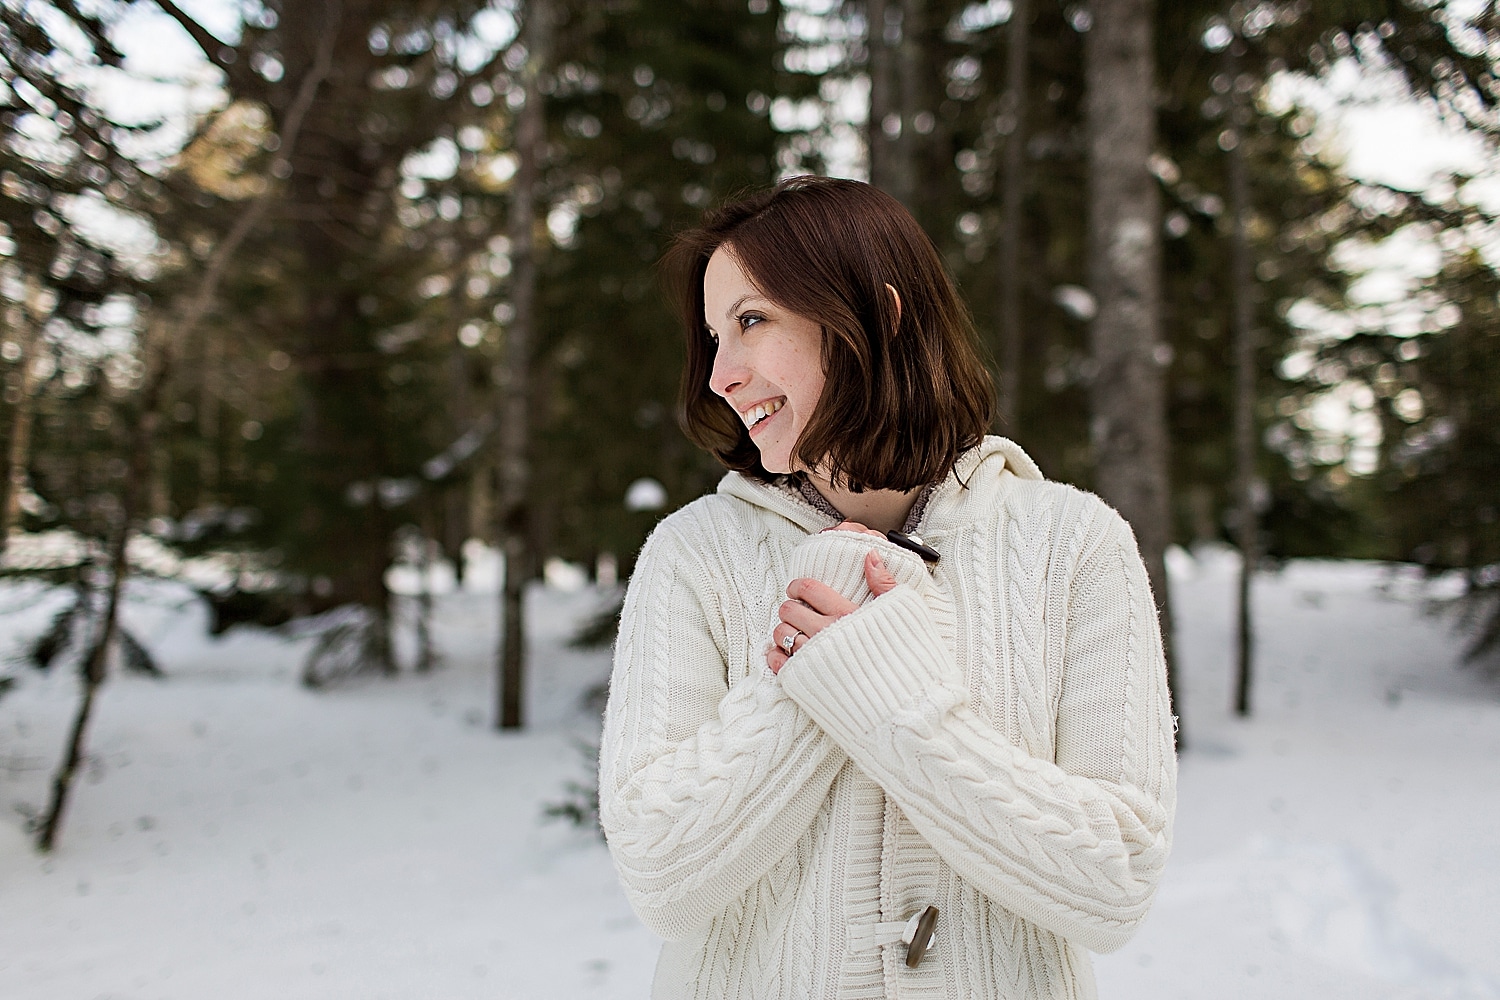 Bride-to-be during winter engagement photos in Acadia National Park